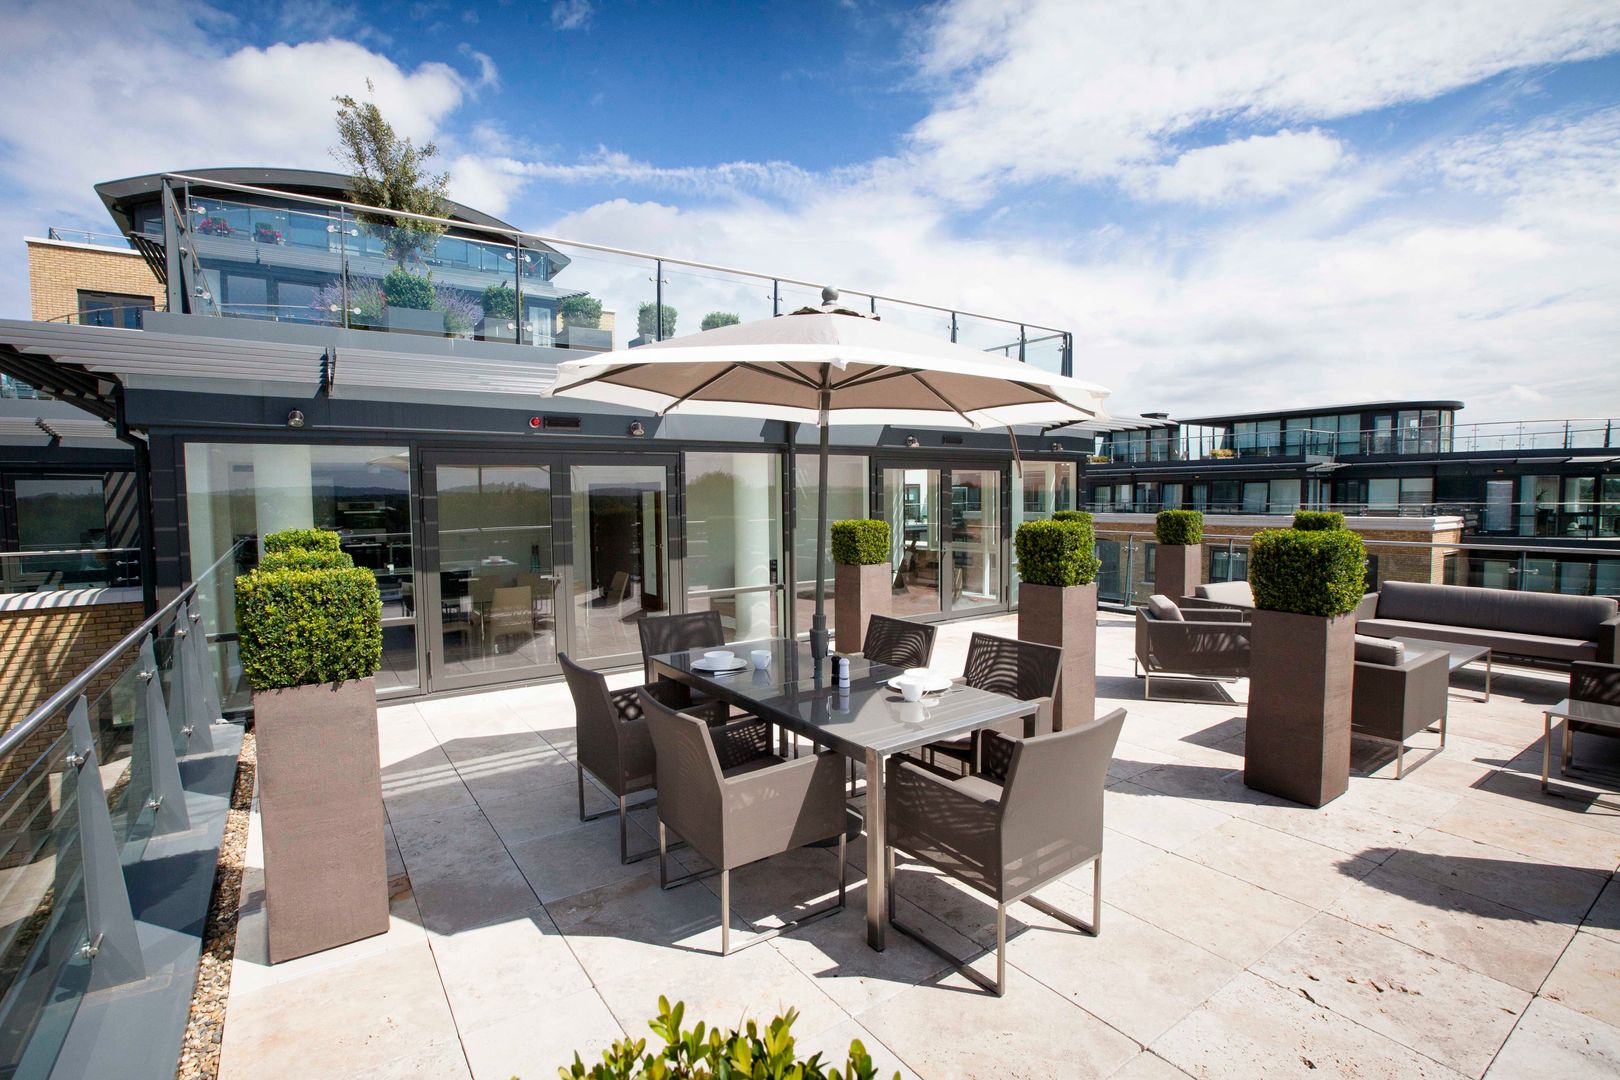 Kew Roof Terrace Cameron Landscapes and Gardens رووف تراس